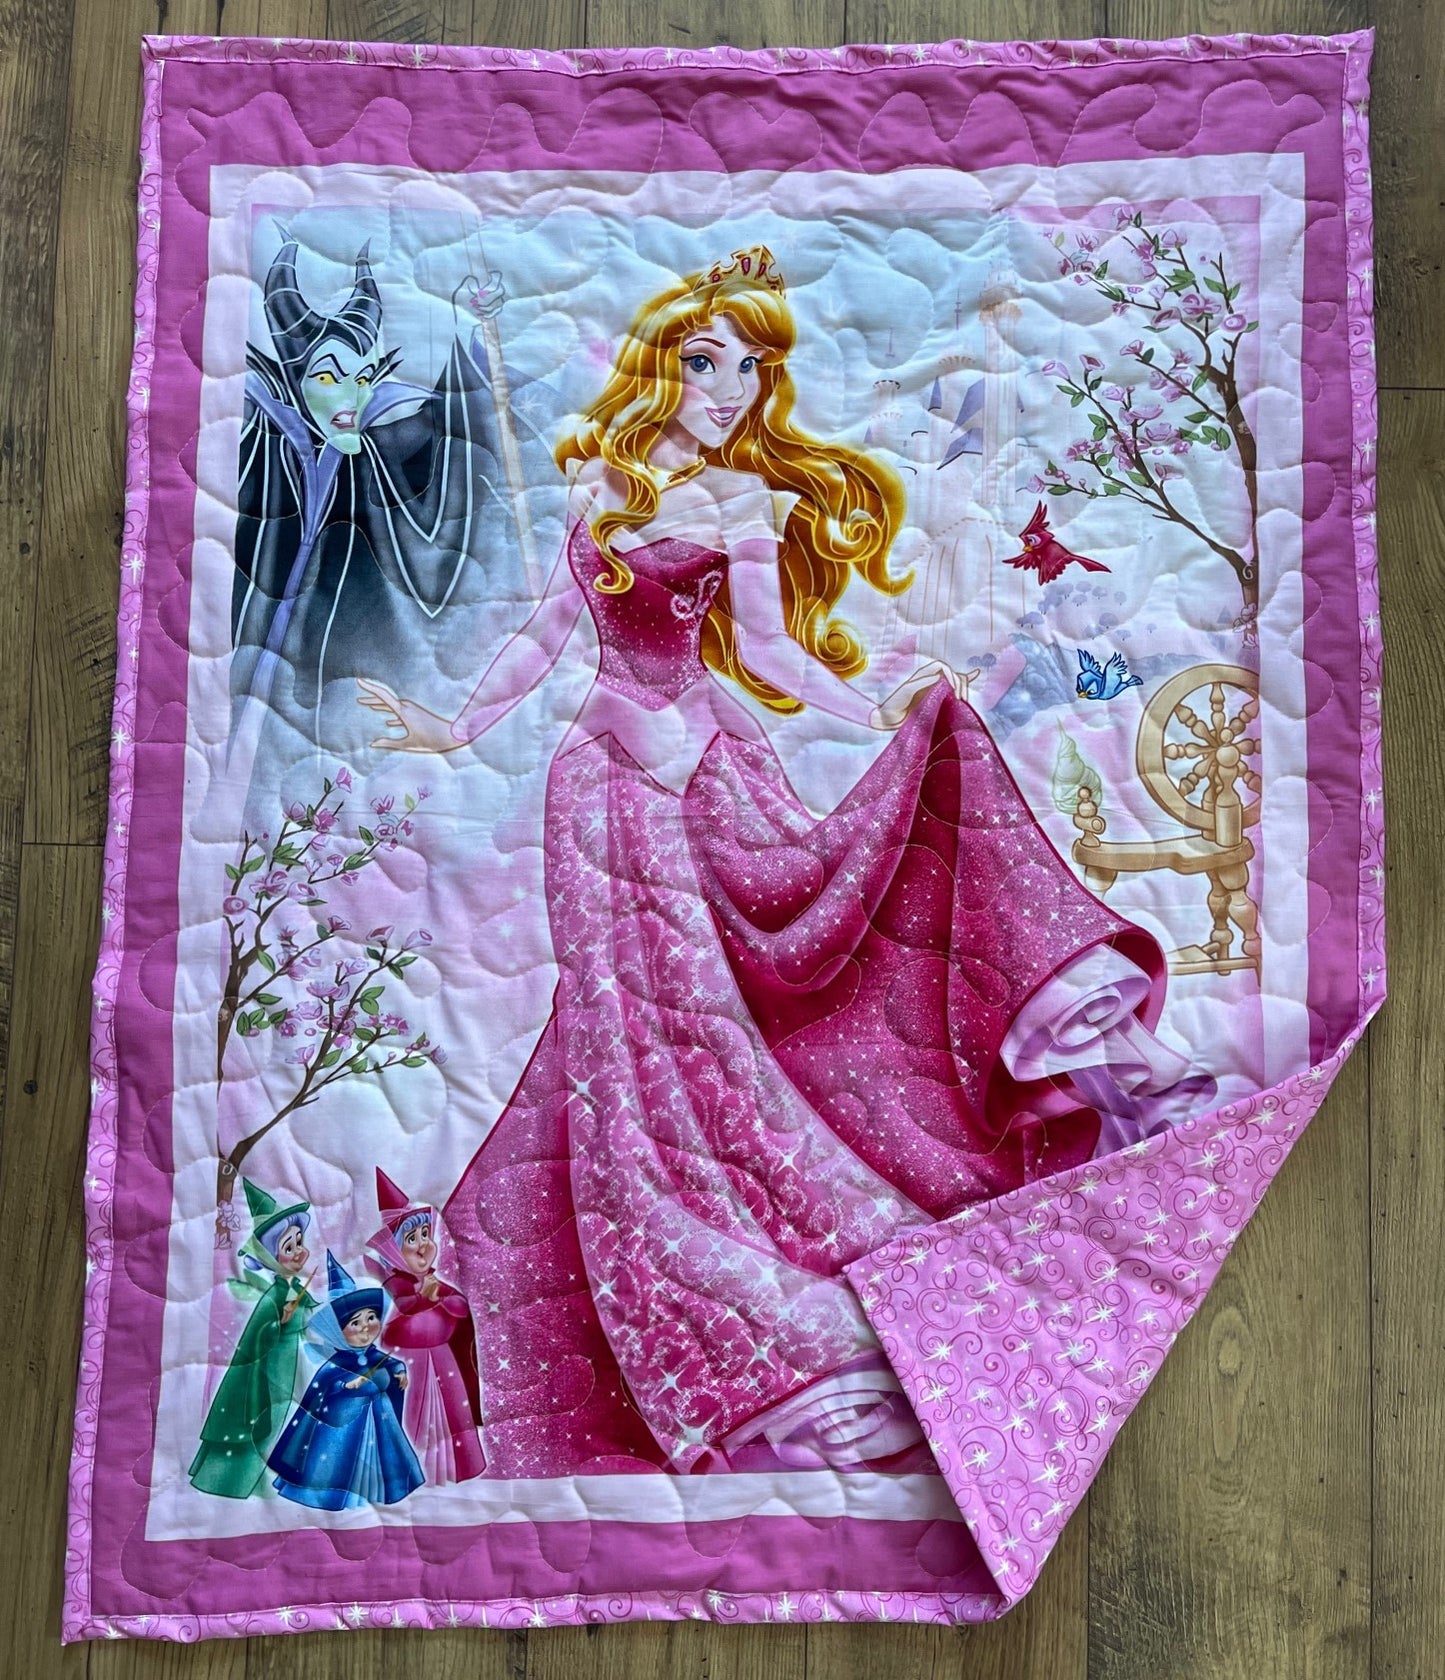 DISNEY CLASSIC AURORA SLEEPING BEAUTY with FAIRY GODMOTHERS & MALEFICENT Inspired 36"X44" Quilted Blanket